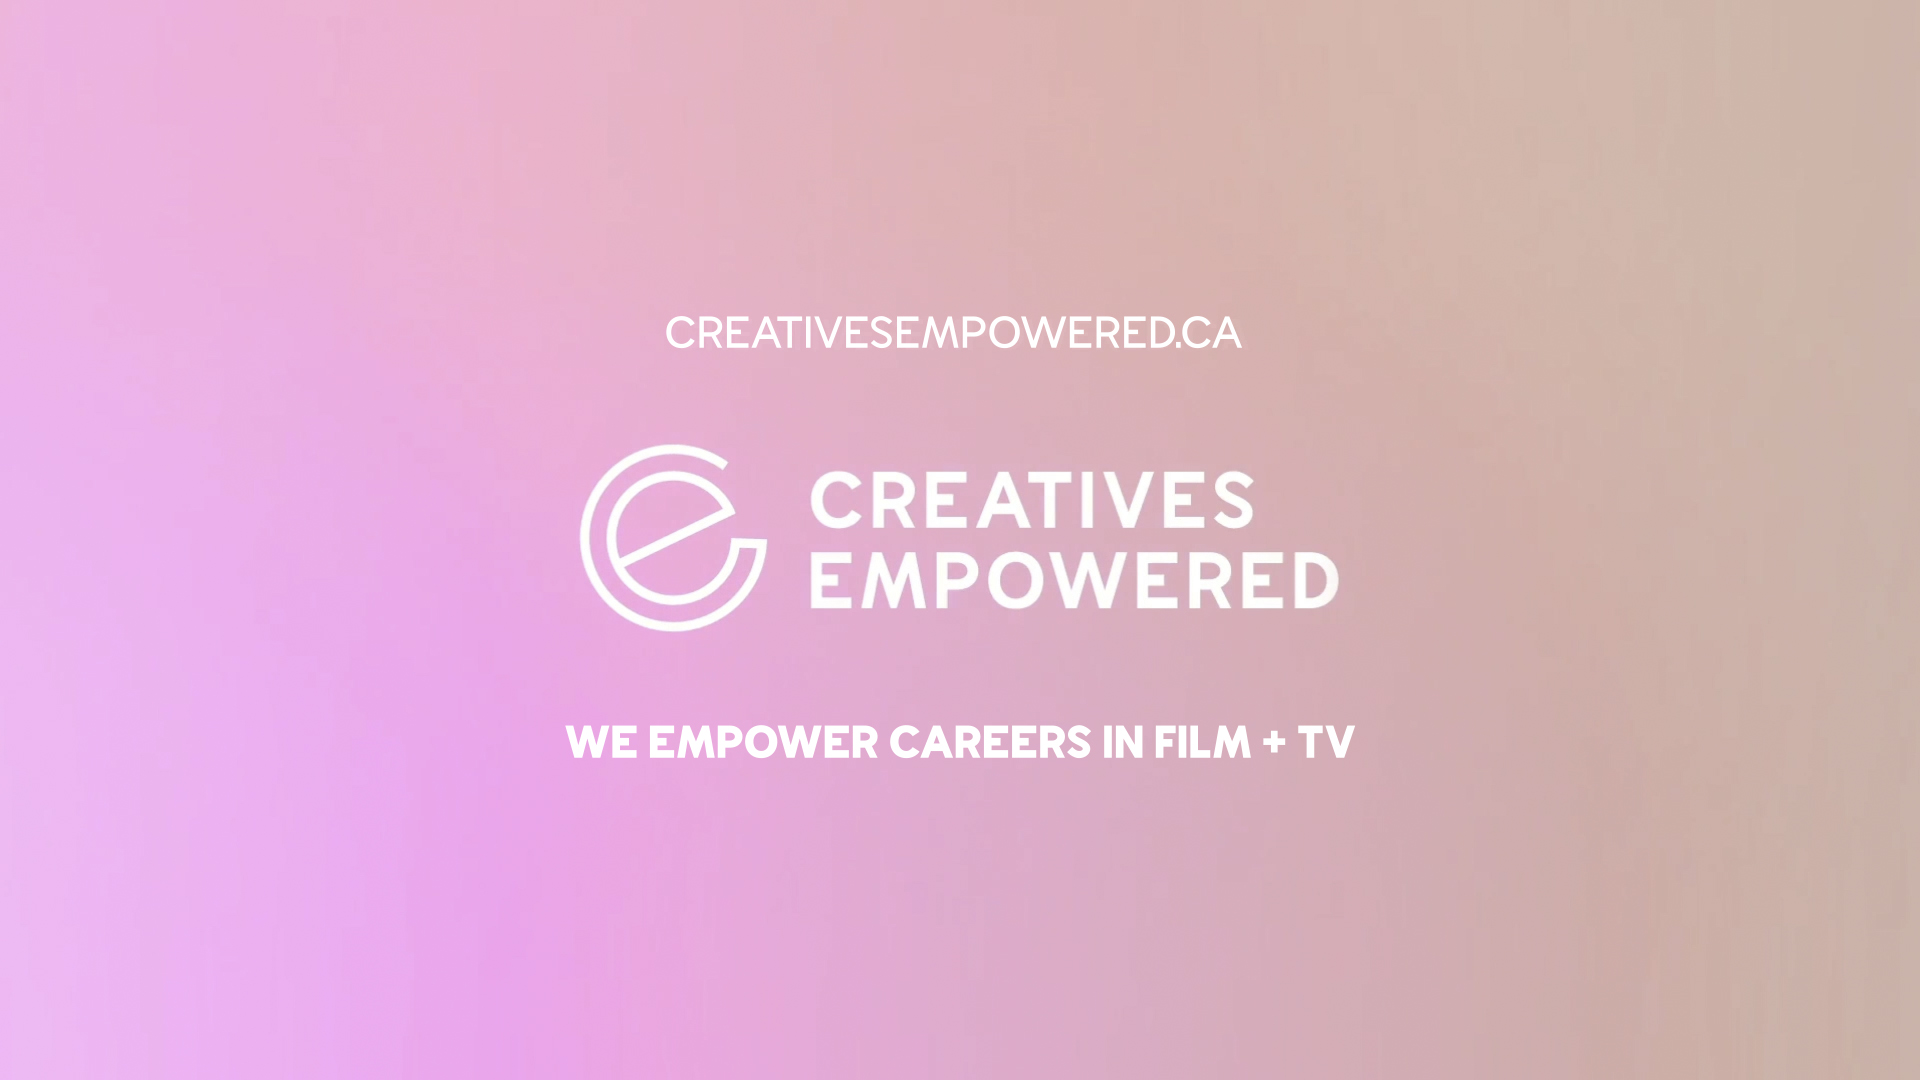 Creatives Empowered Web File 1920x1080 10Sept21